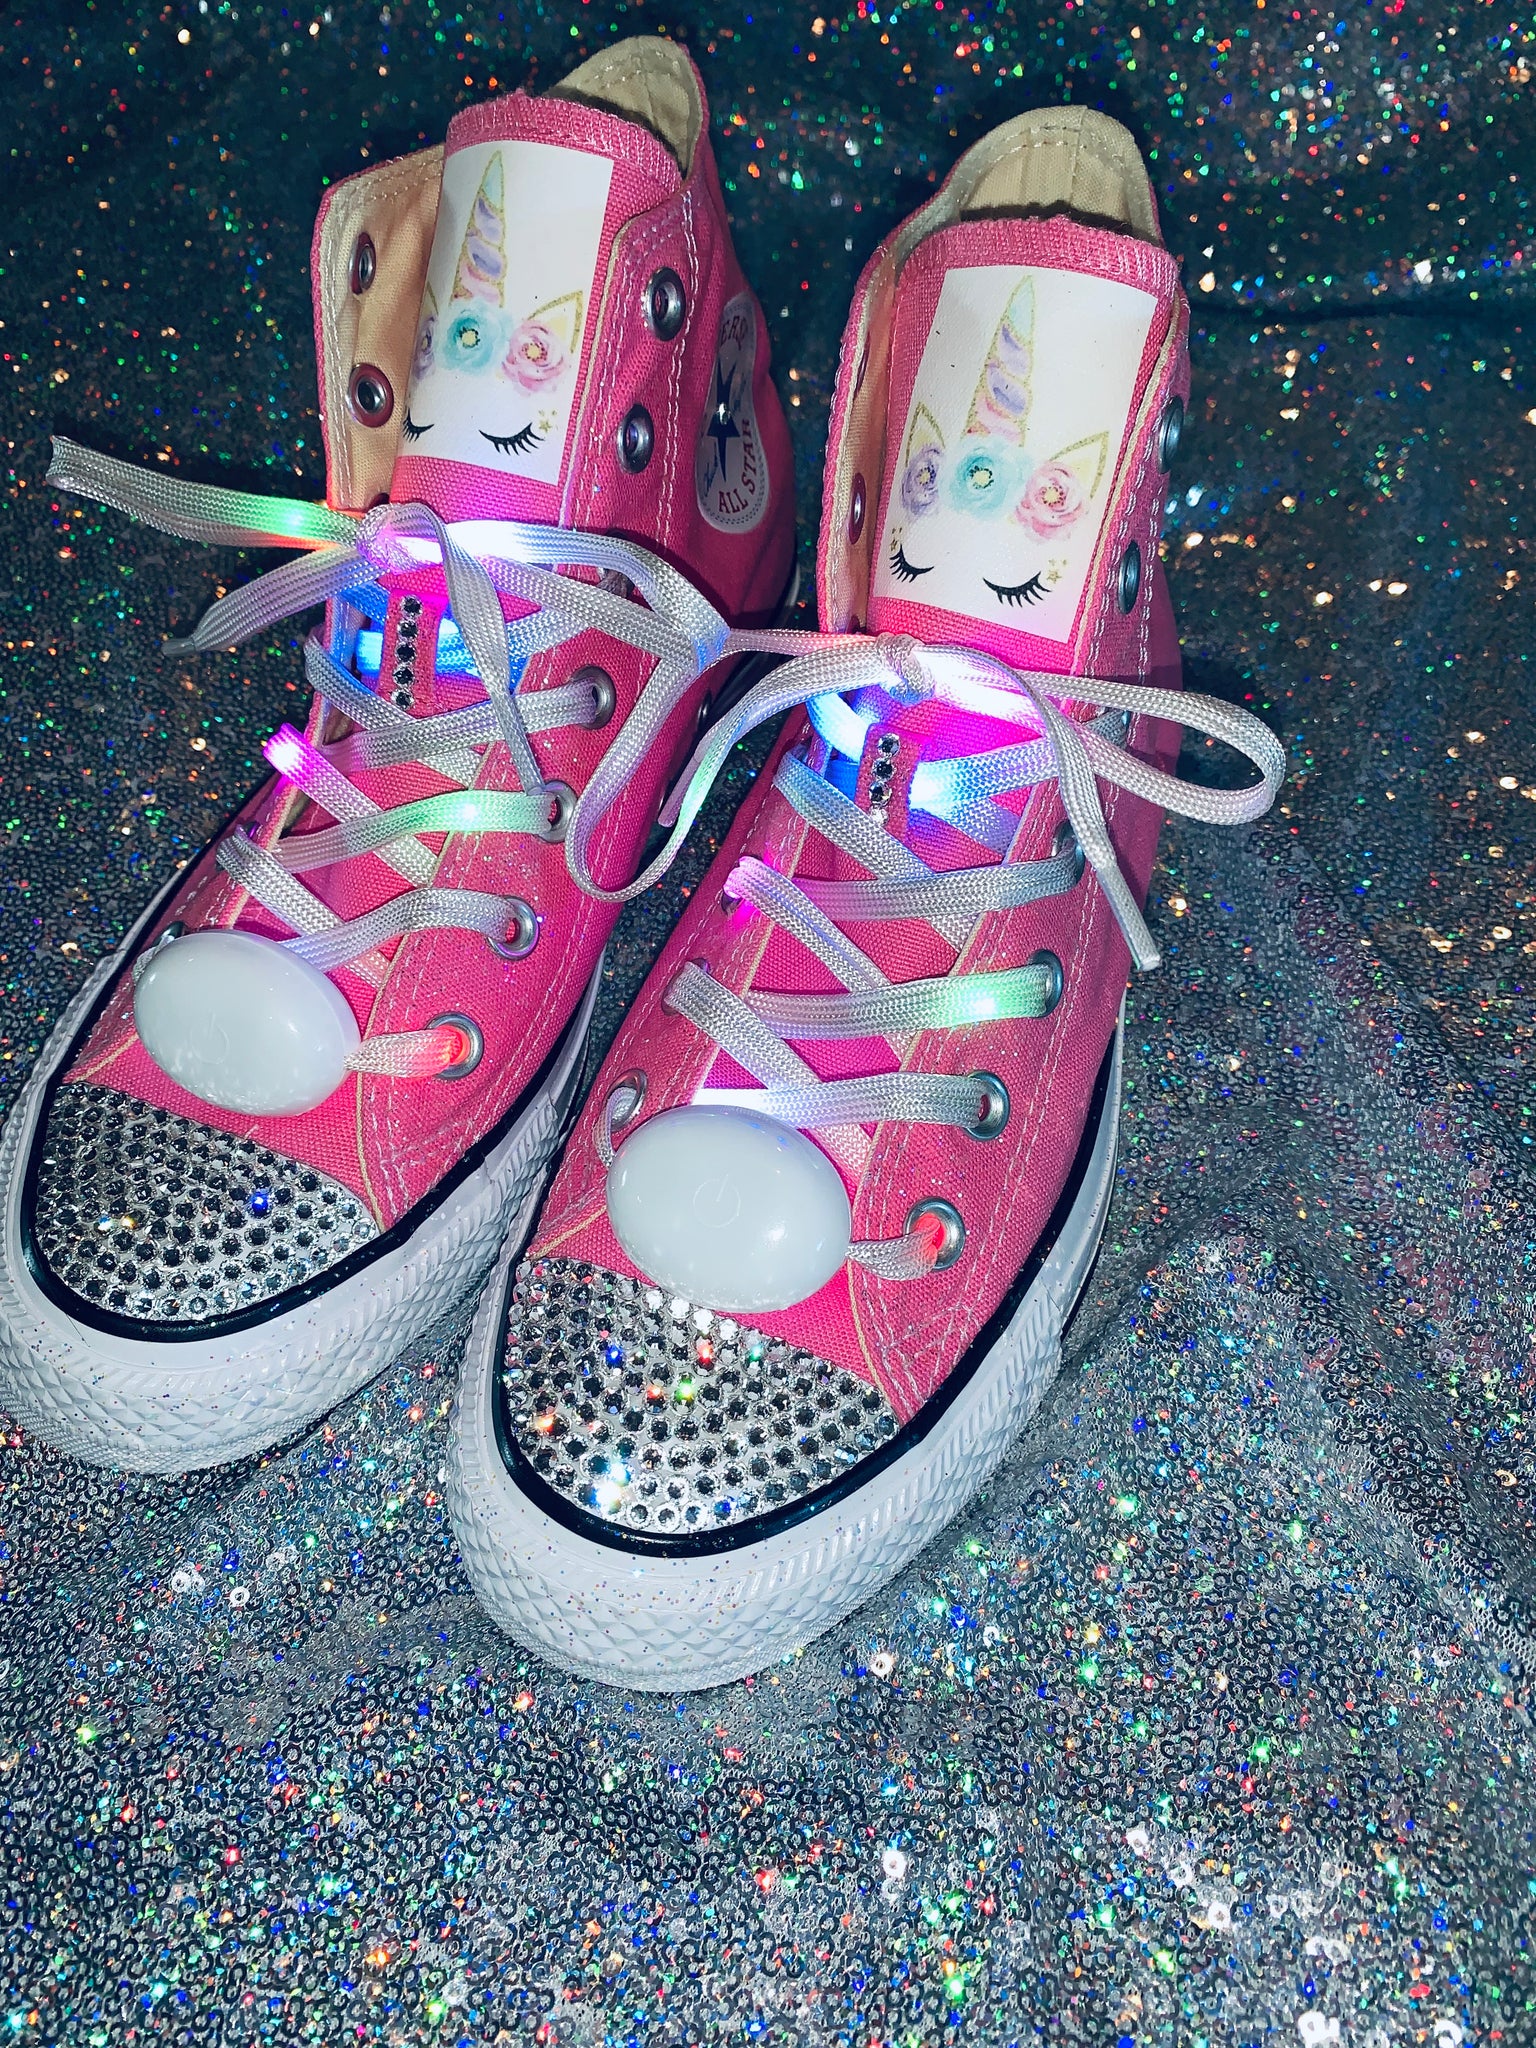 how to bling up converse